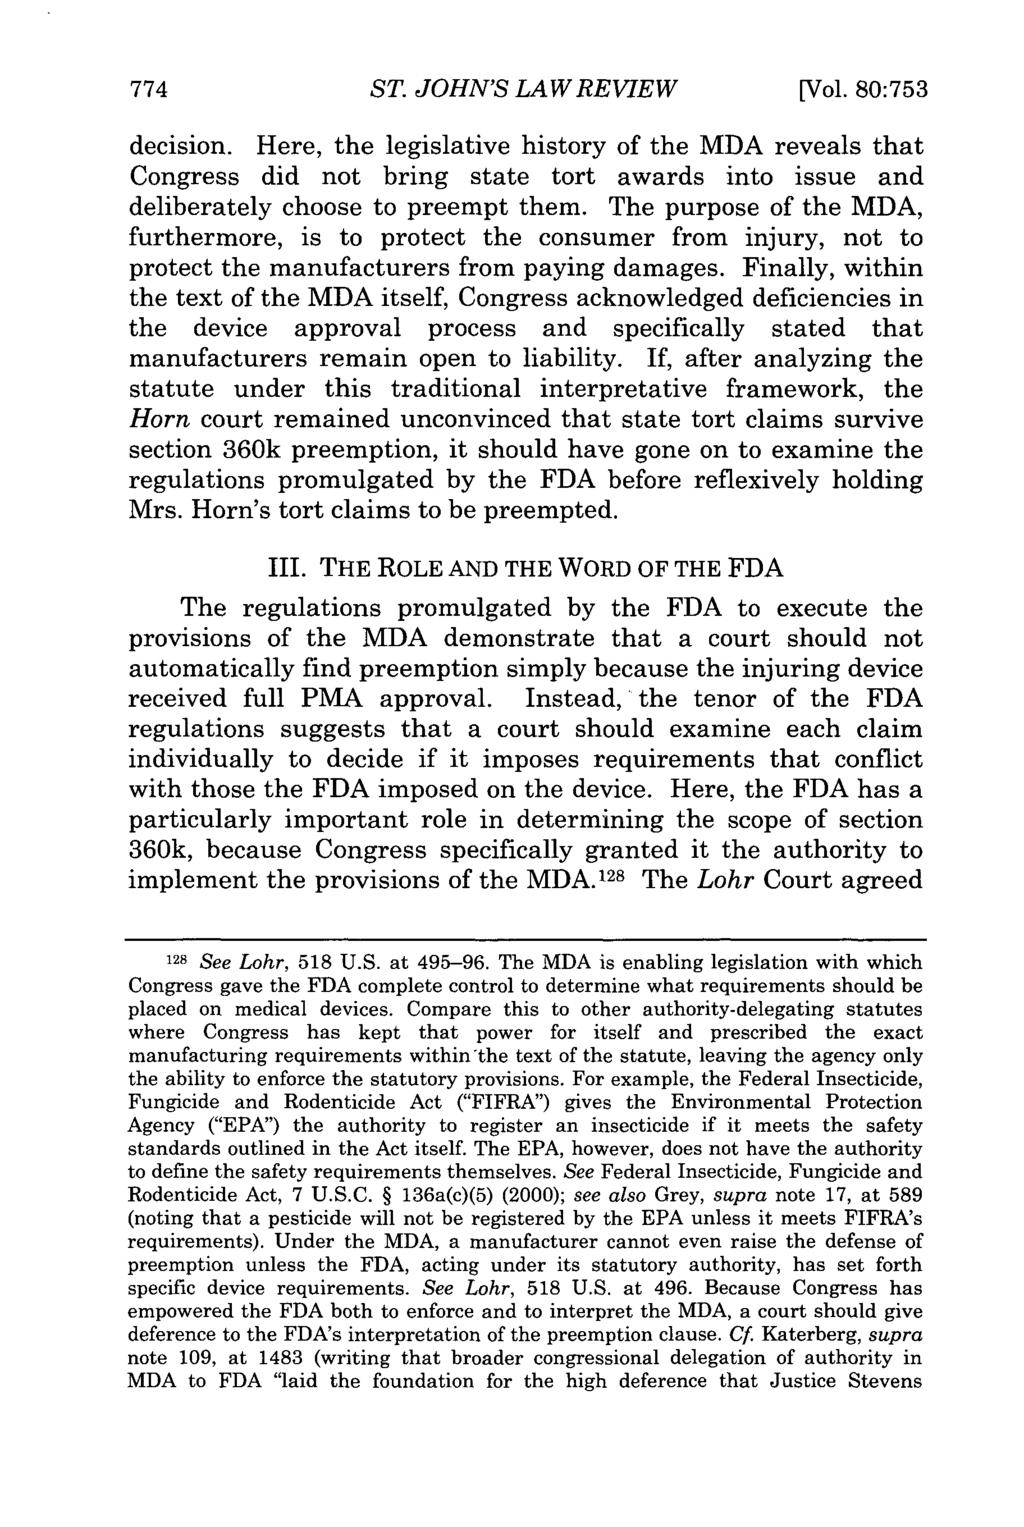 ST. JOHN'S LAW REVIEW [Vol. 80:753 decision. Here, the legislative history of the MDA reveals that Congress did not bring state tort awards into issue and deliberately choose to preempt them.